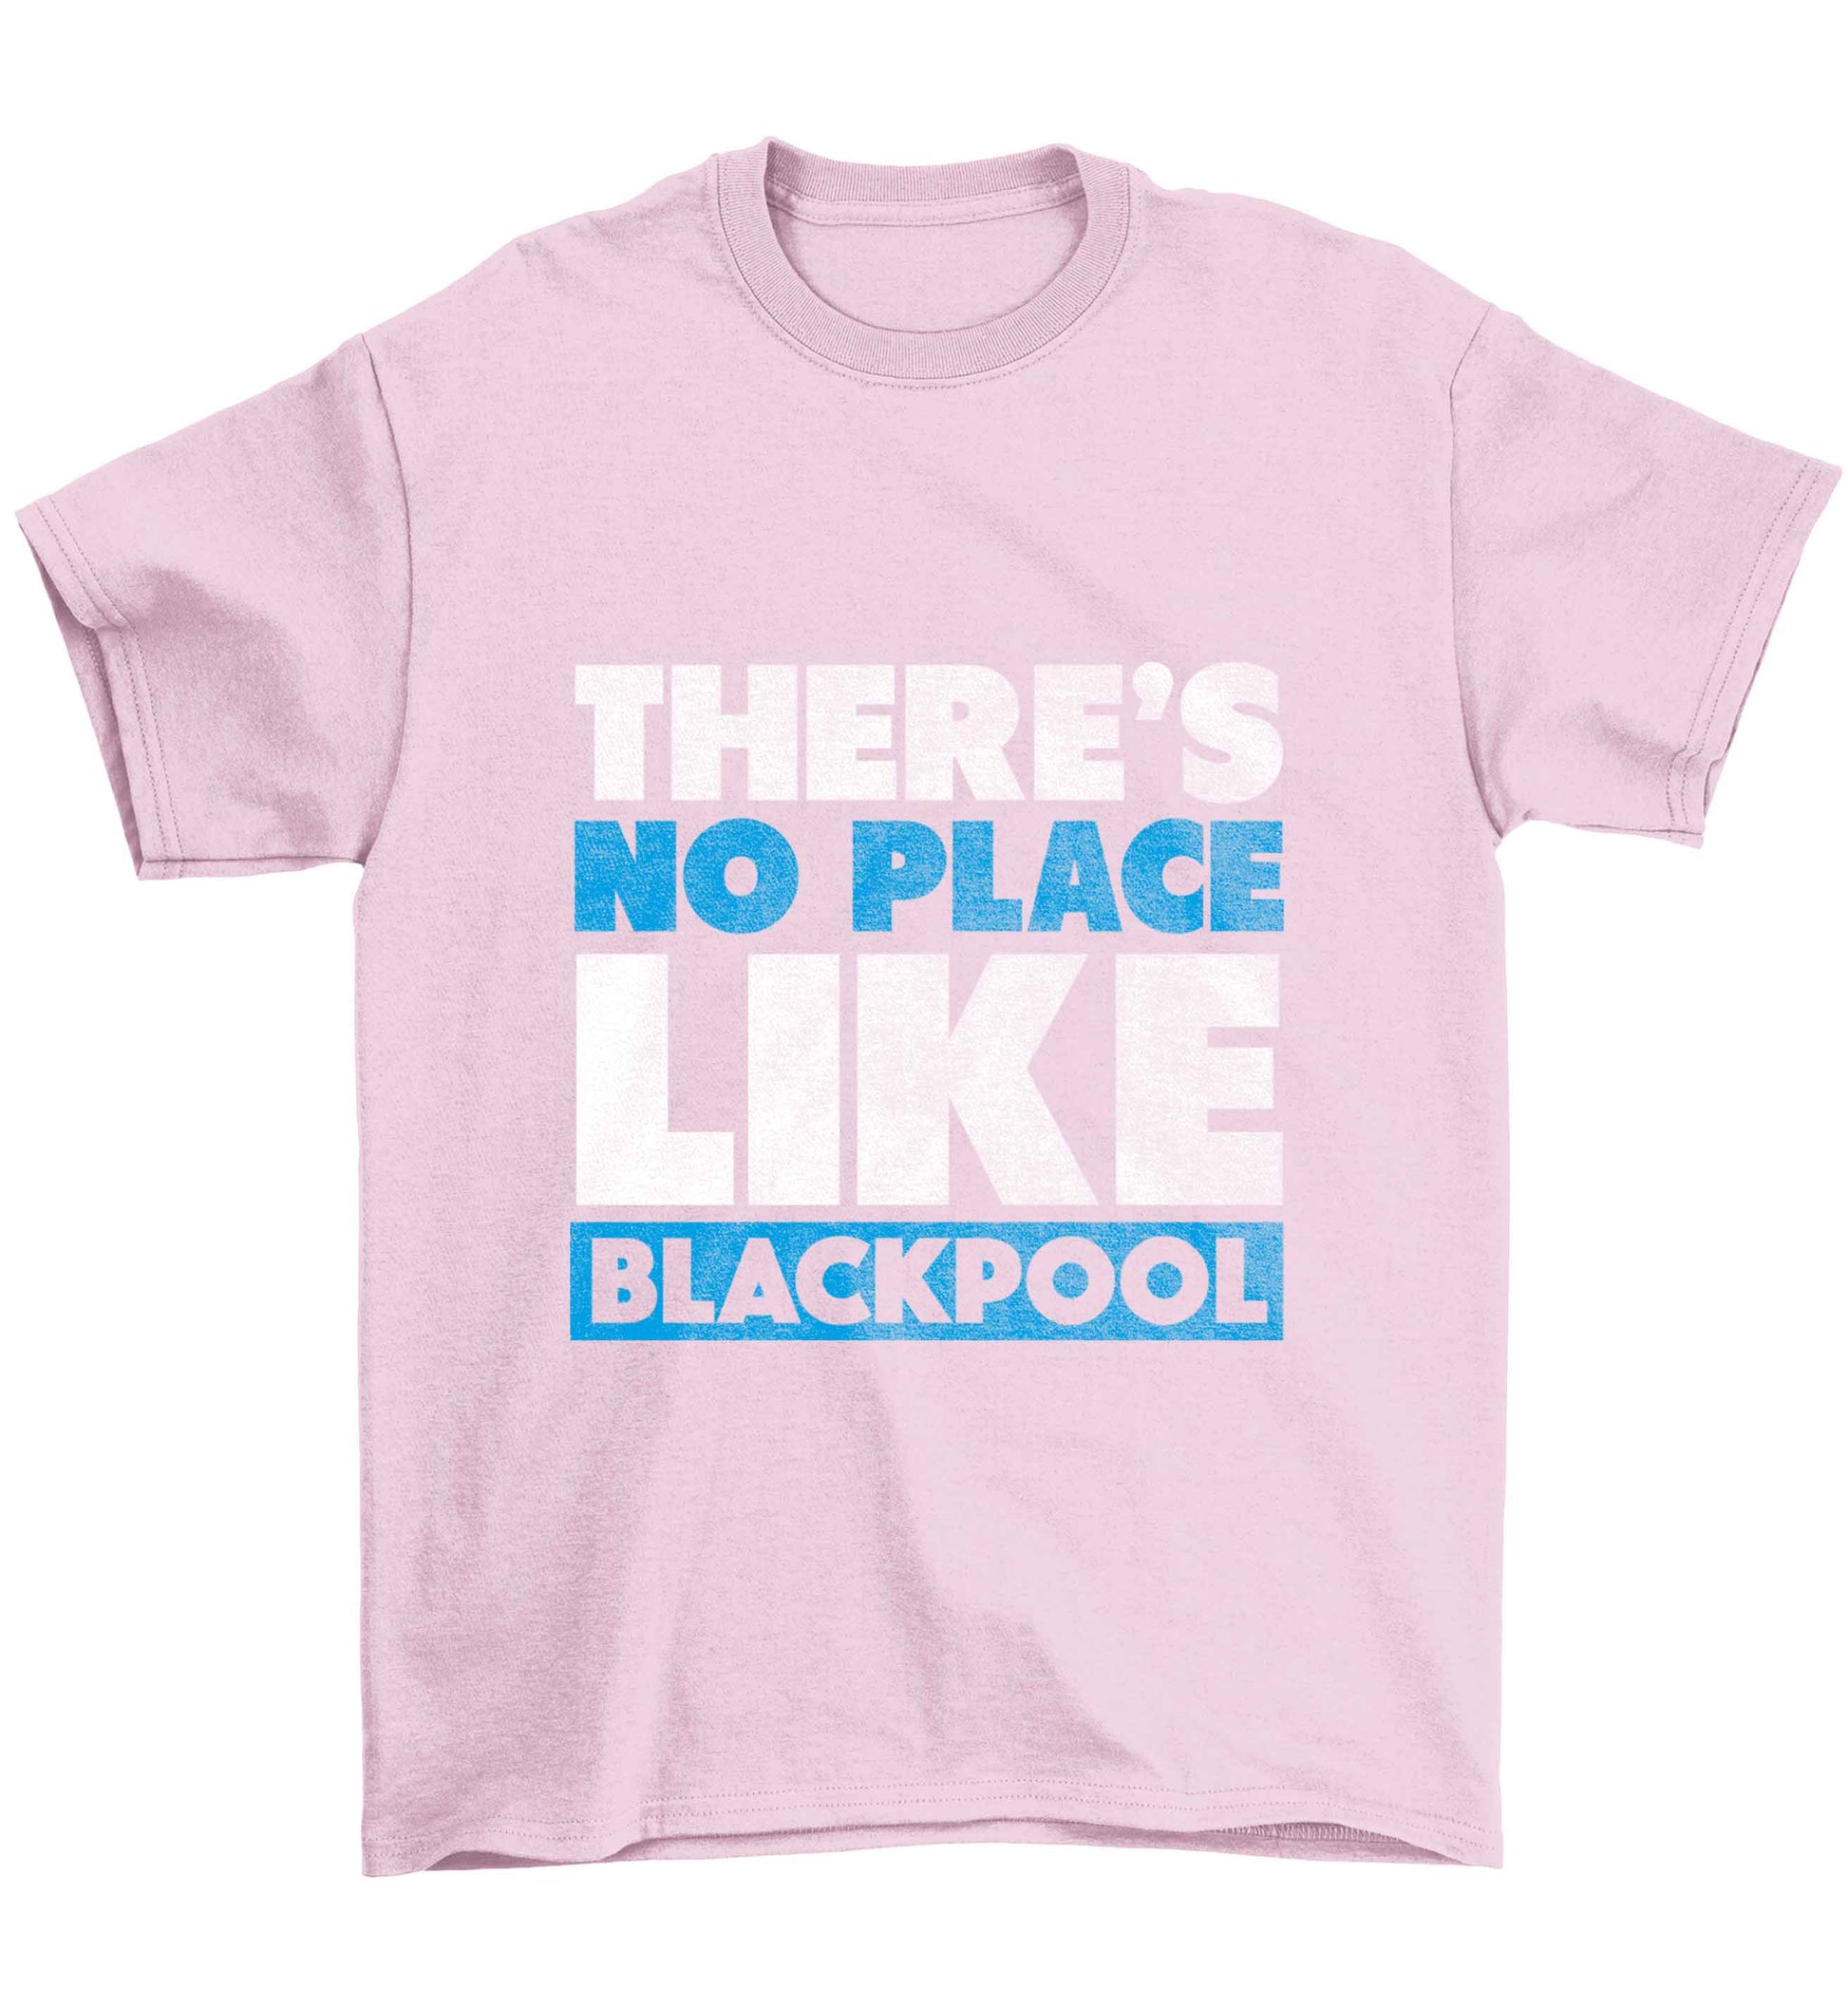 There's no place like Blackpool Children's light pink Tshirt 12-13 Years